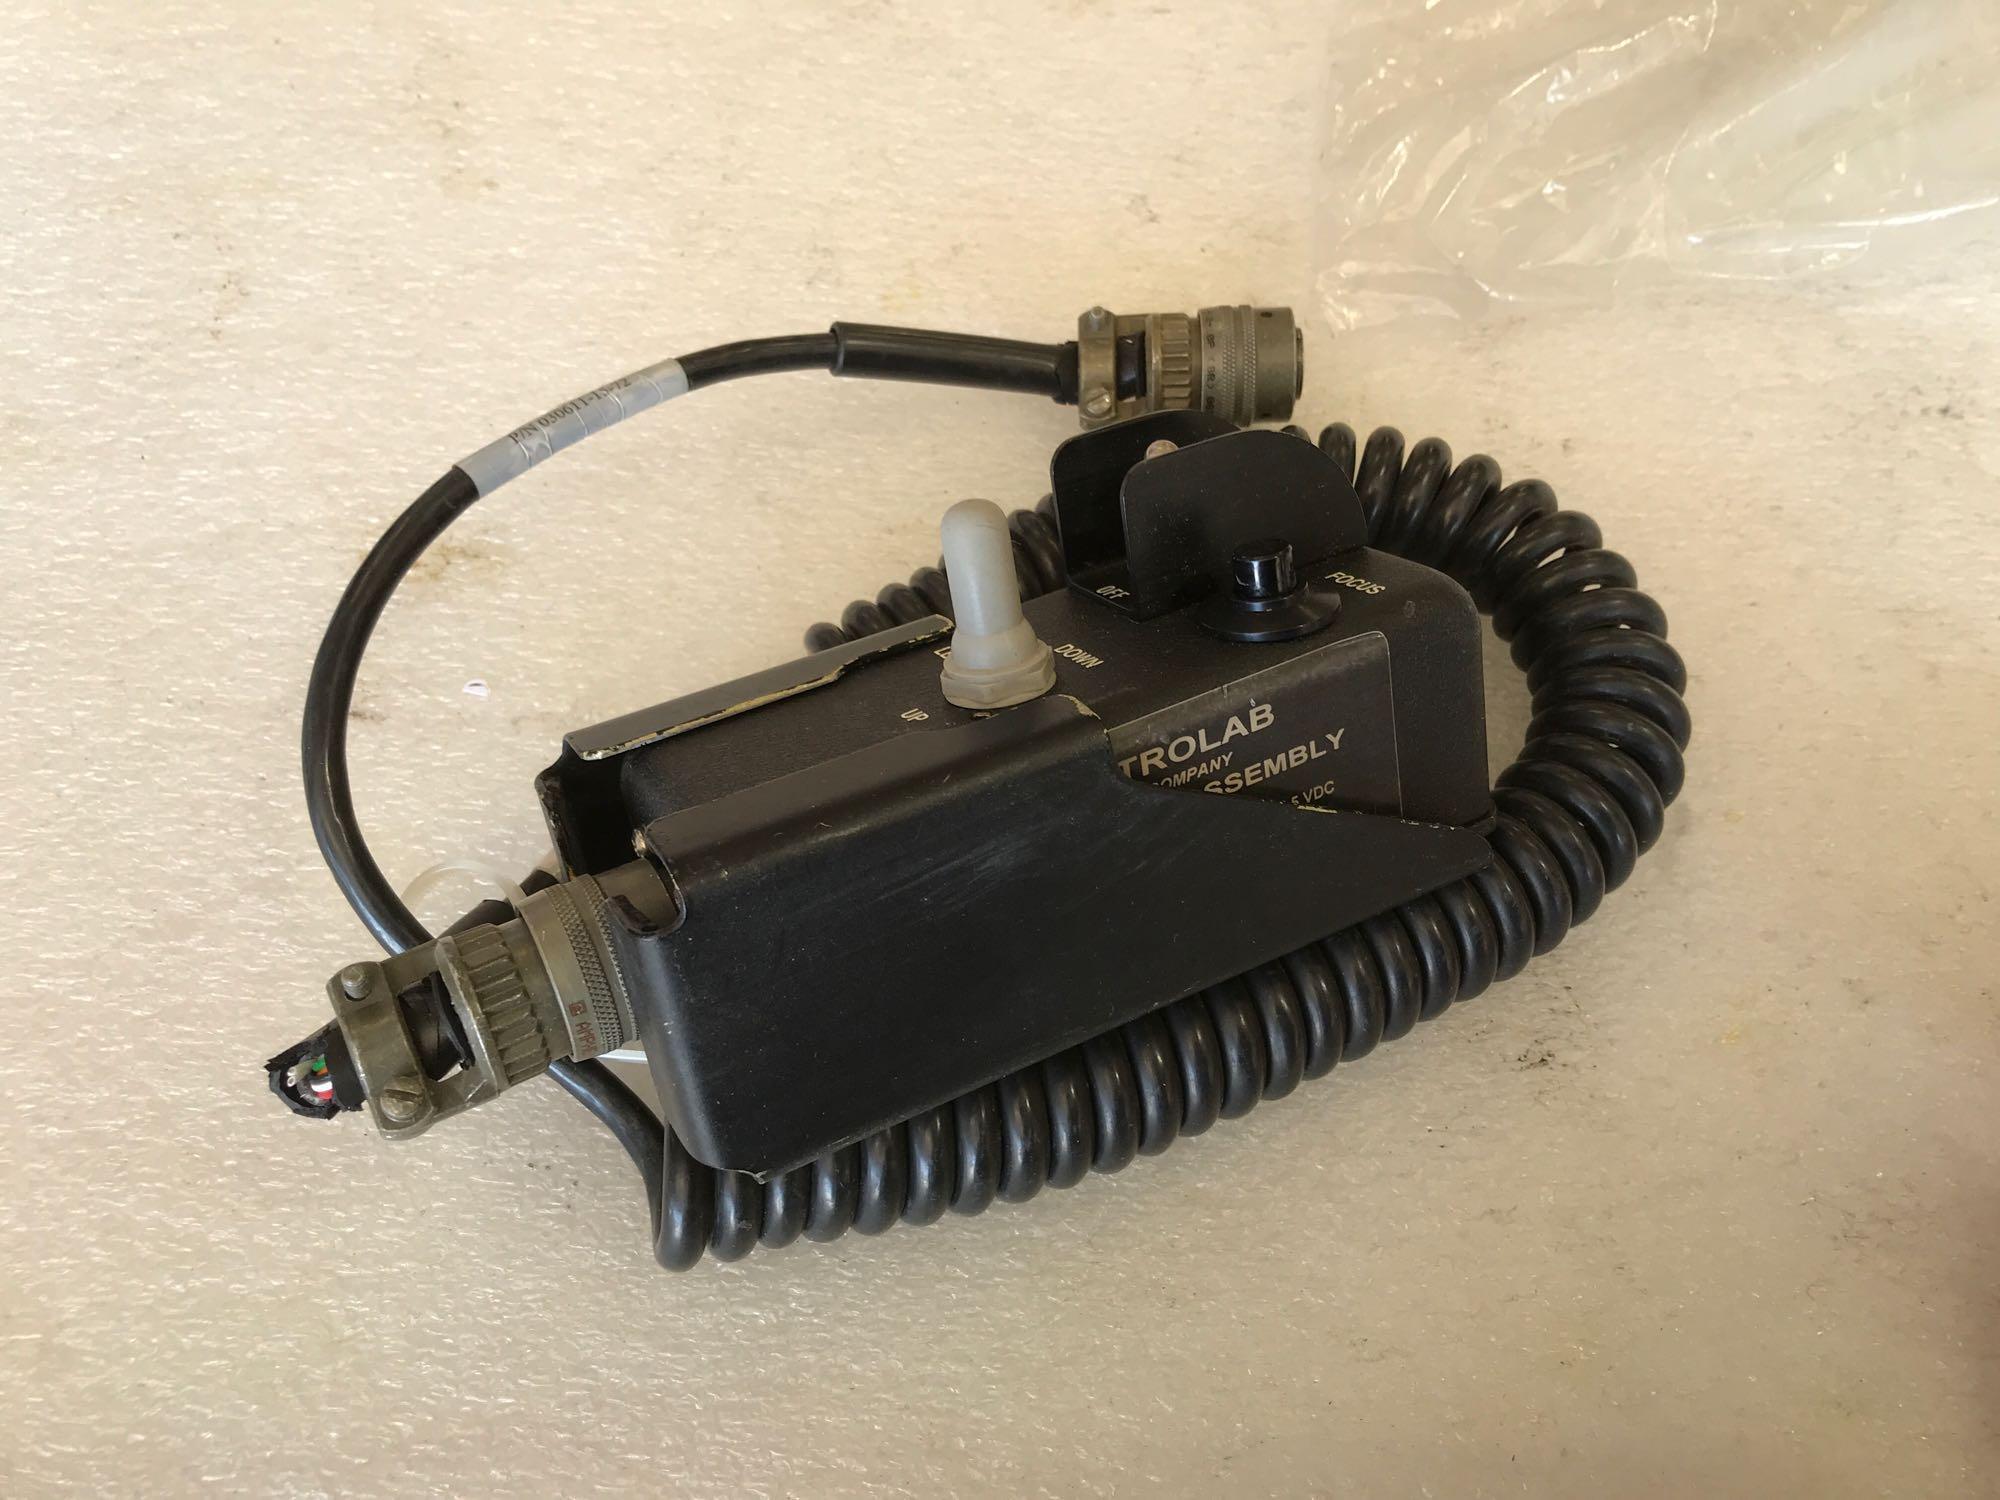 SX-5 SEARCHLIGHT HAND CONTROLLER 030039 (AS REMOVED)